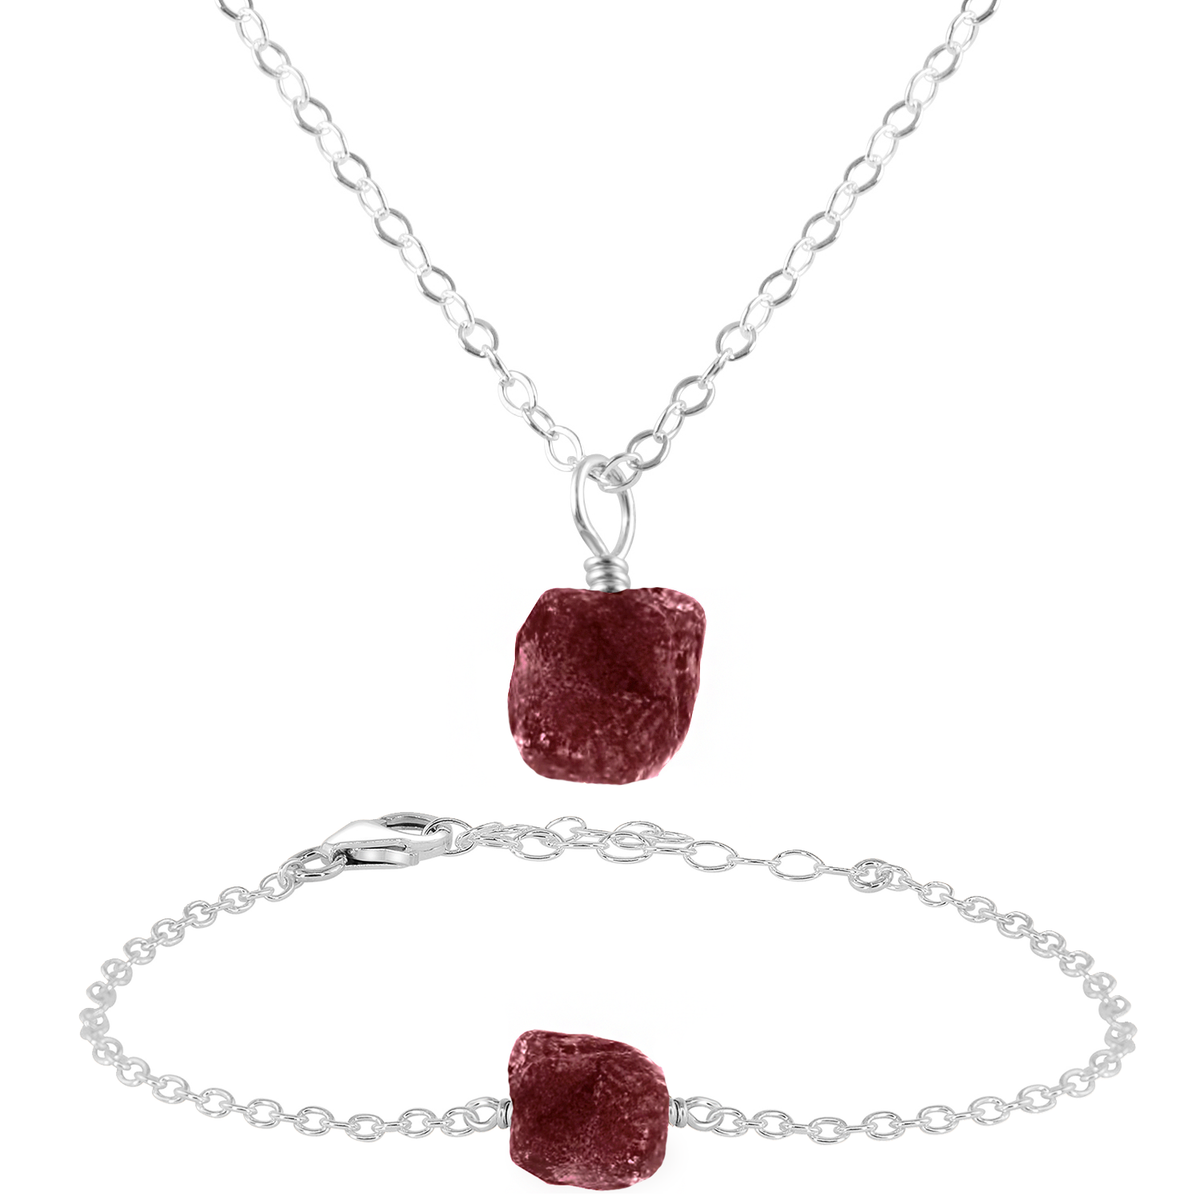 Raw Ruby Crystal Jewellery Set - Raw Ruby Crystal Jewellery Set - Sterling Silver / Cable / Necklace & Bracelet - Luna Tide Handmade Crystal Jewellery